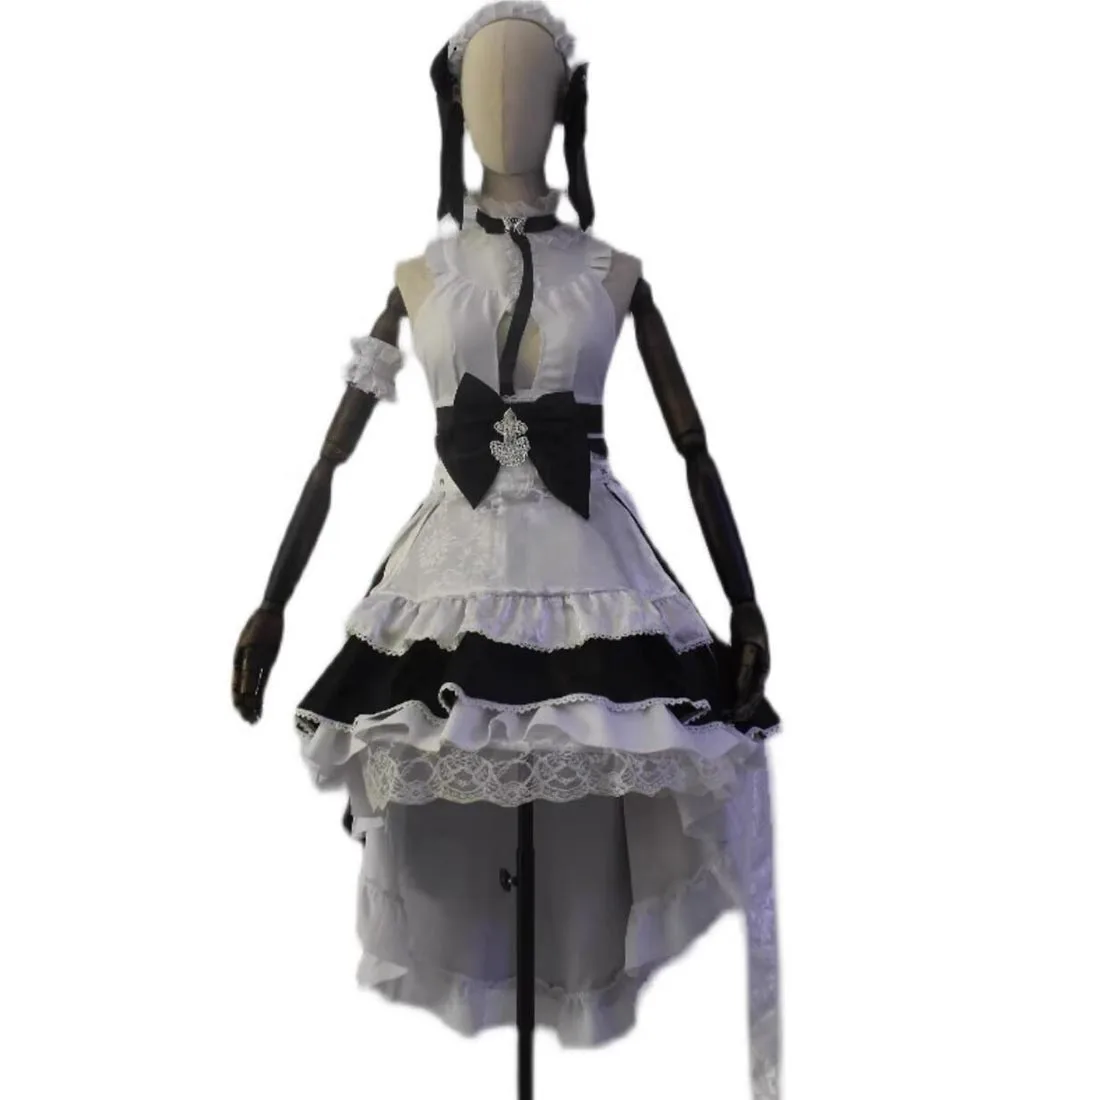 

2023 Game Azur Lane KMS August von Parseval Cosplay Costume Party Christmas Halloween Custom Made Any Size